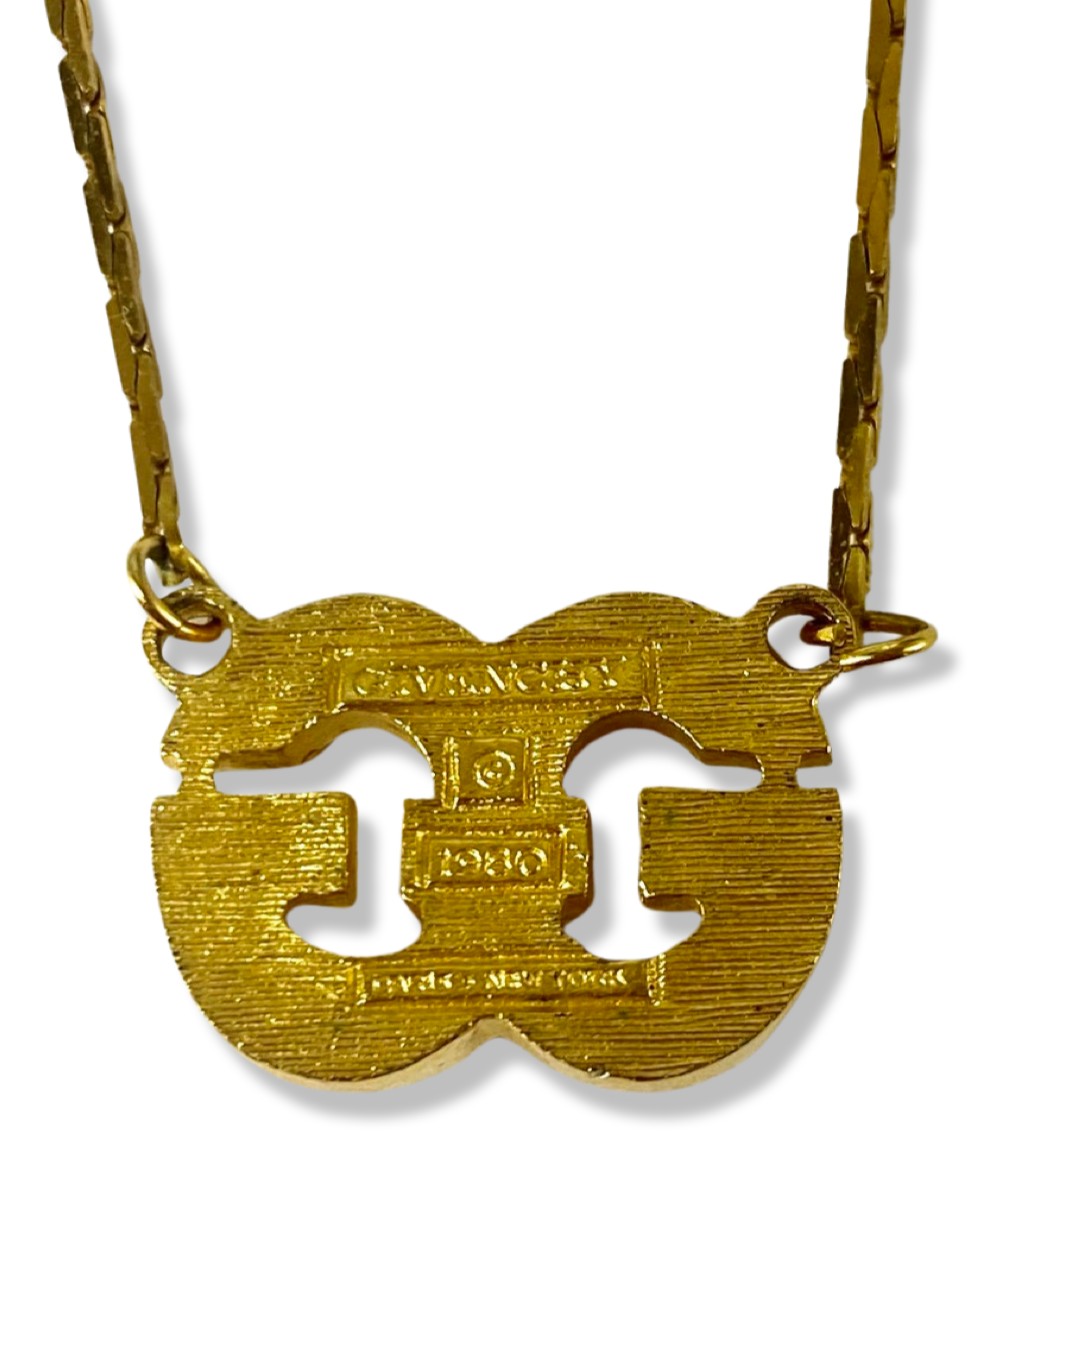 Givenchy Gold Tone 'G' Necklace weighing 7.37 grams measuring 38cm in length - Image 3 of 3